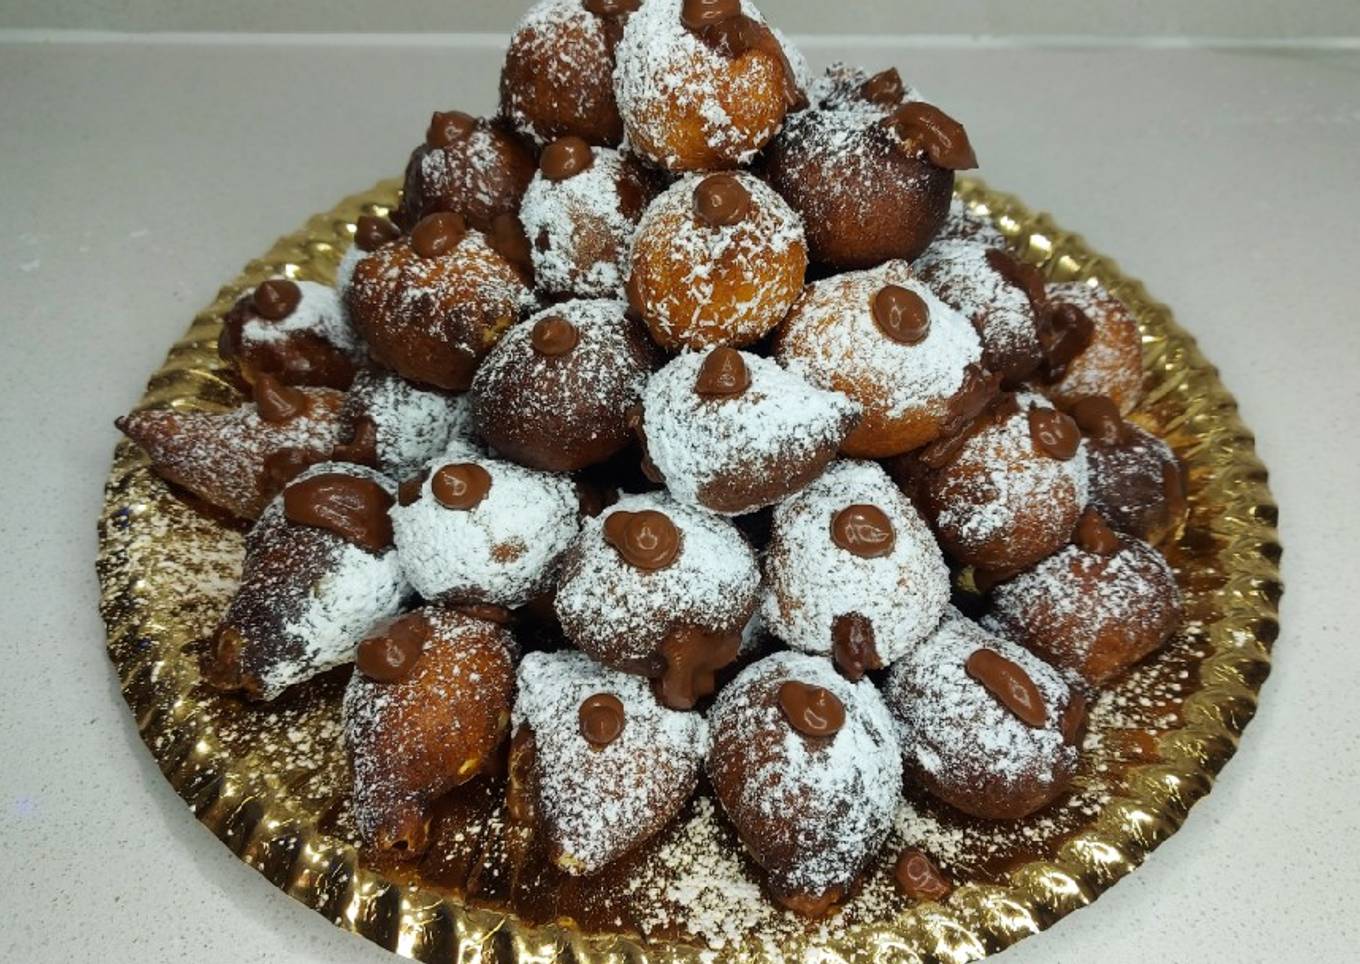 Coconut fritter with chocolate cream